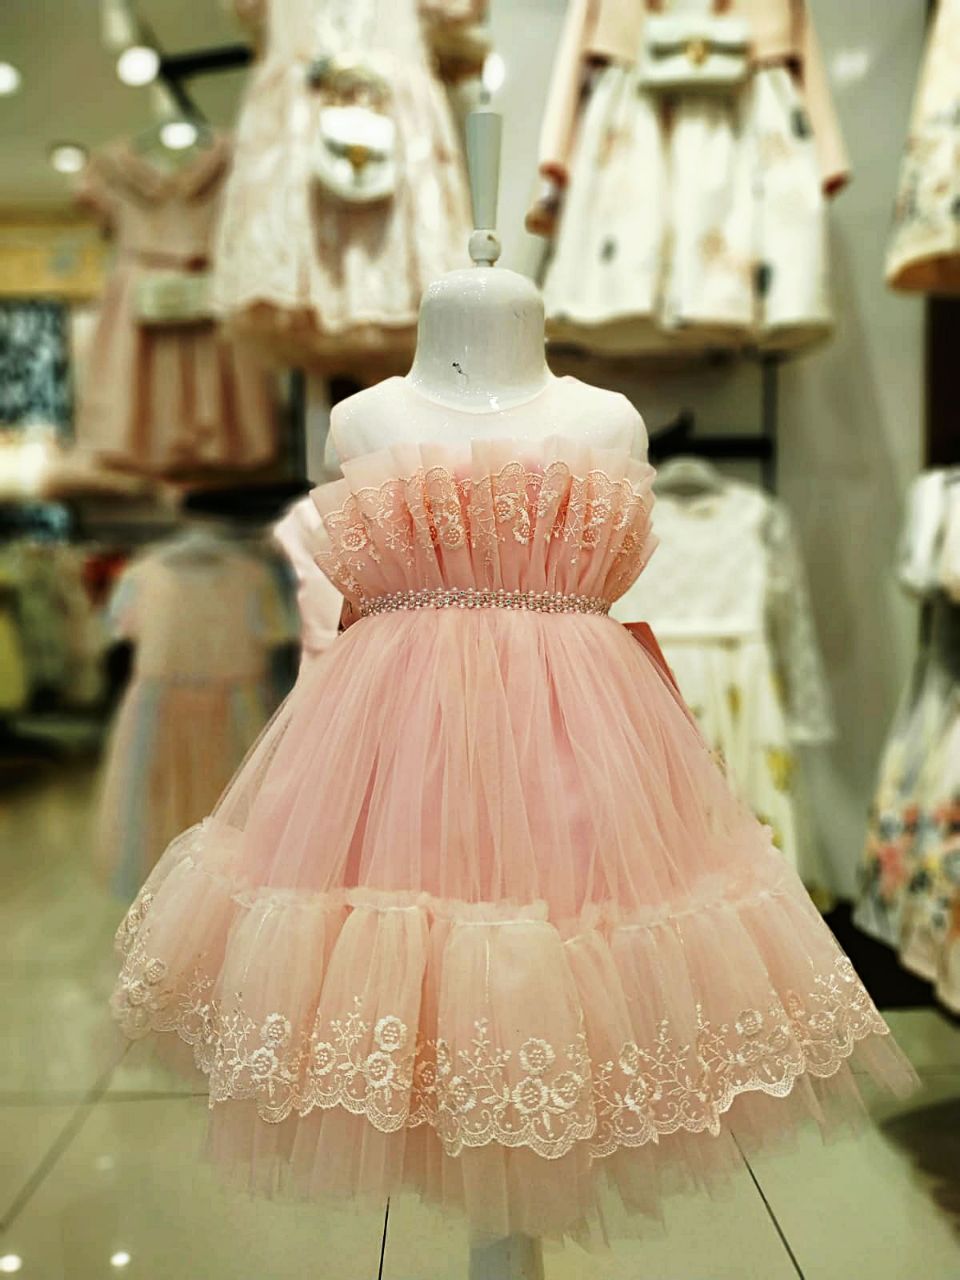 Tulle Organza Pink Floral Lace Girl Dress Set- Dressy Angels